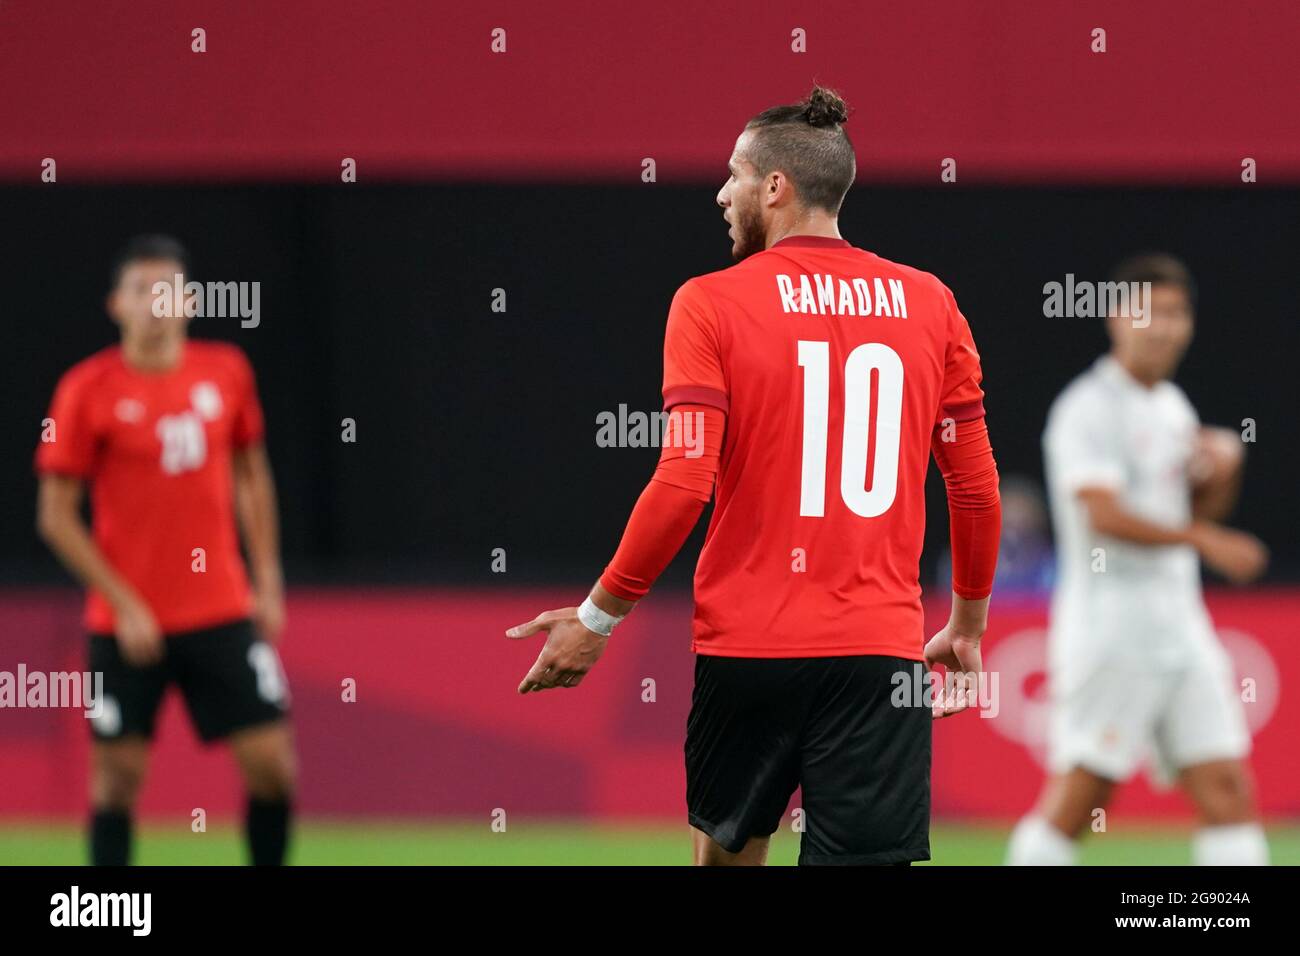 Sapporo, Japan. 22nd July, 2021. Ramadan Sobhi (10 Egypt) in action (close up player) during the Men's Olympic Football Tournament Tokyo 2020 match between Egypt and Spain at Sapporo Dome in Sapporo, Japan. Credit: SPP Sport Press Photo. /Alamy Live News Stock Photo